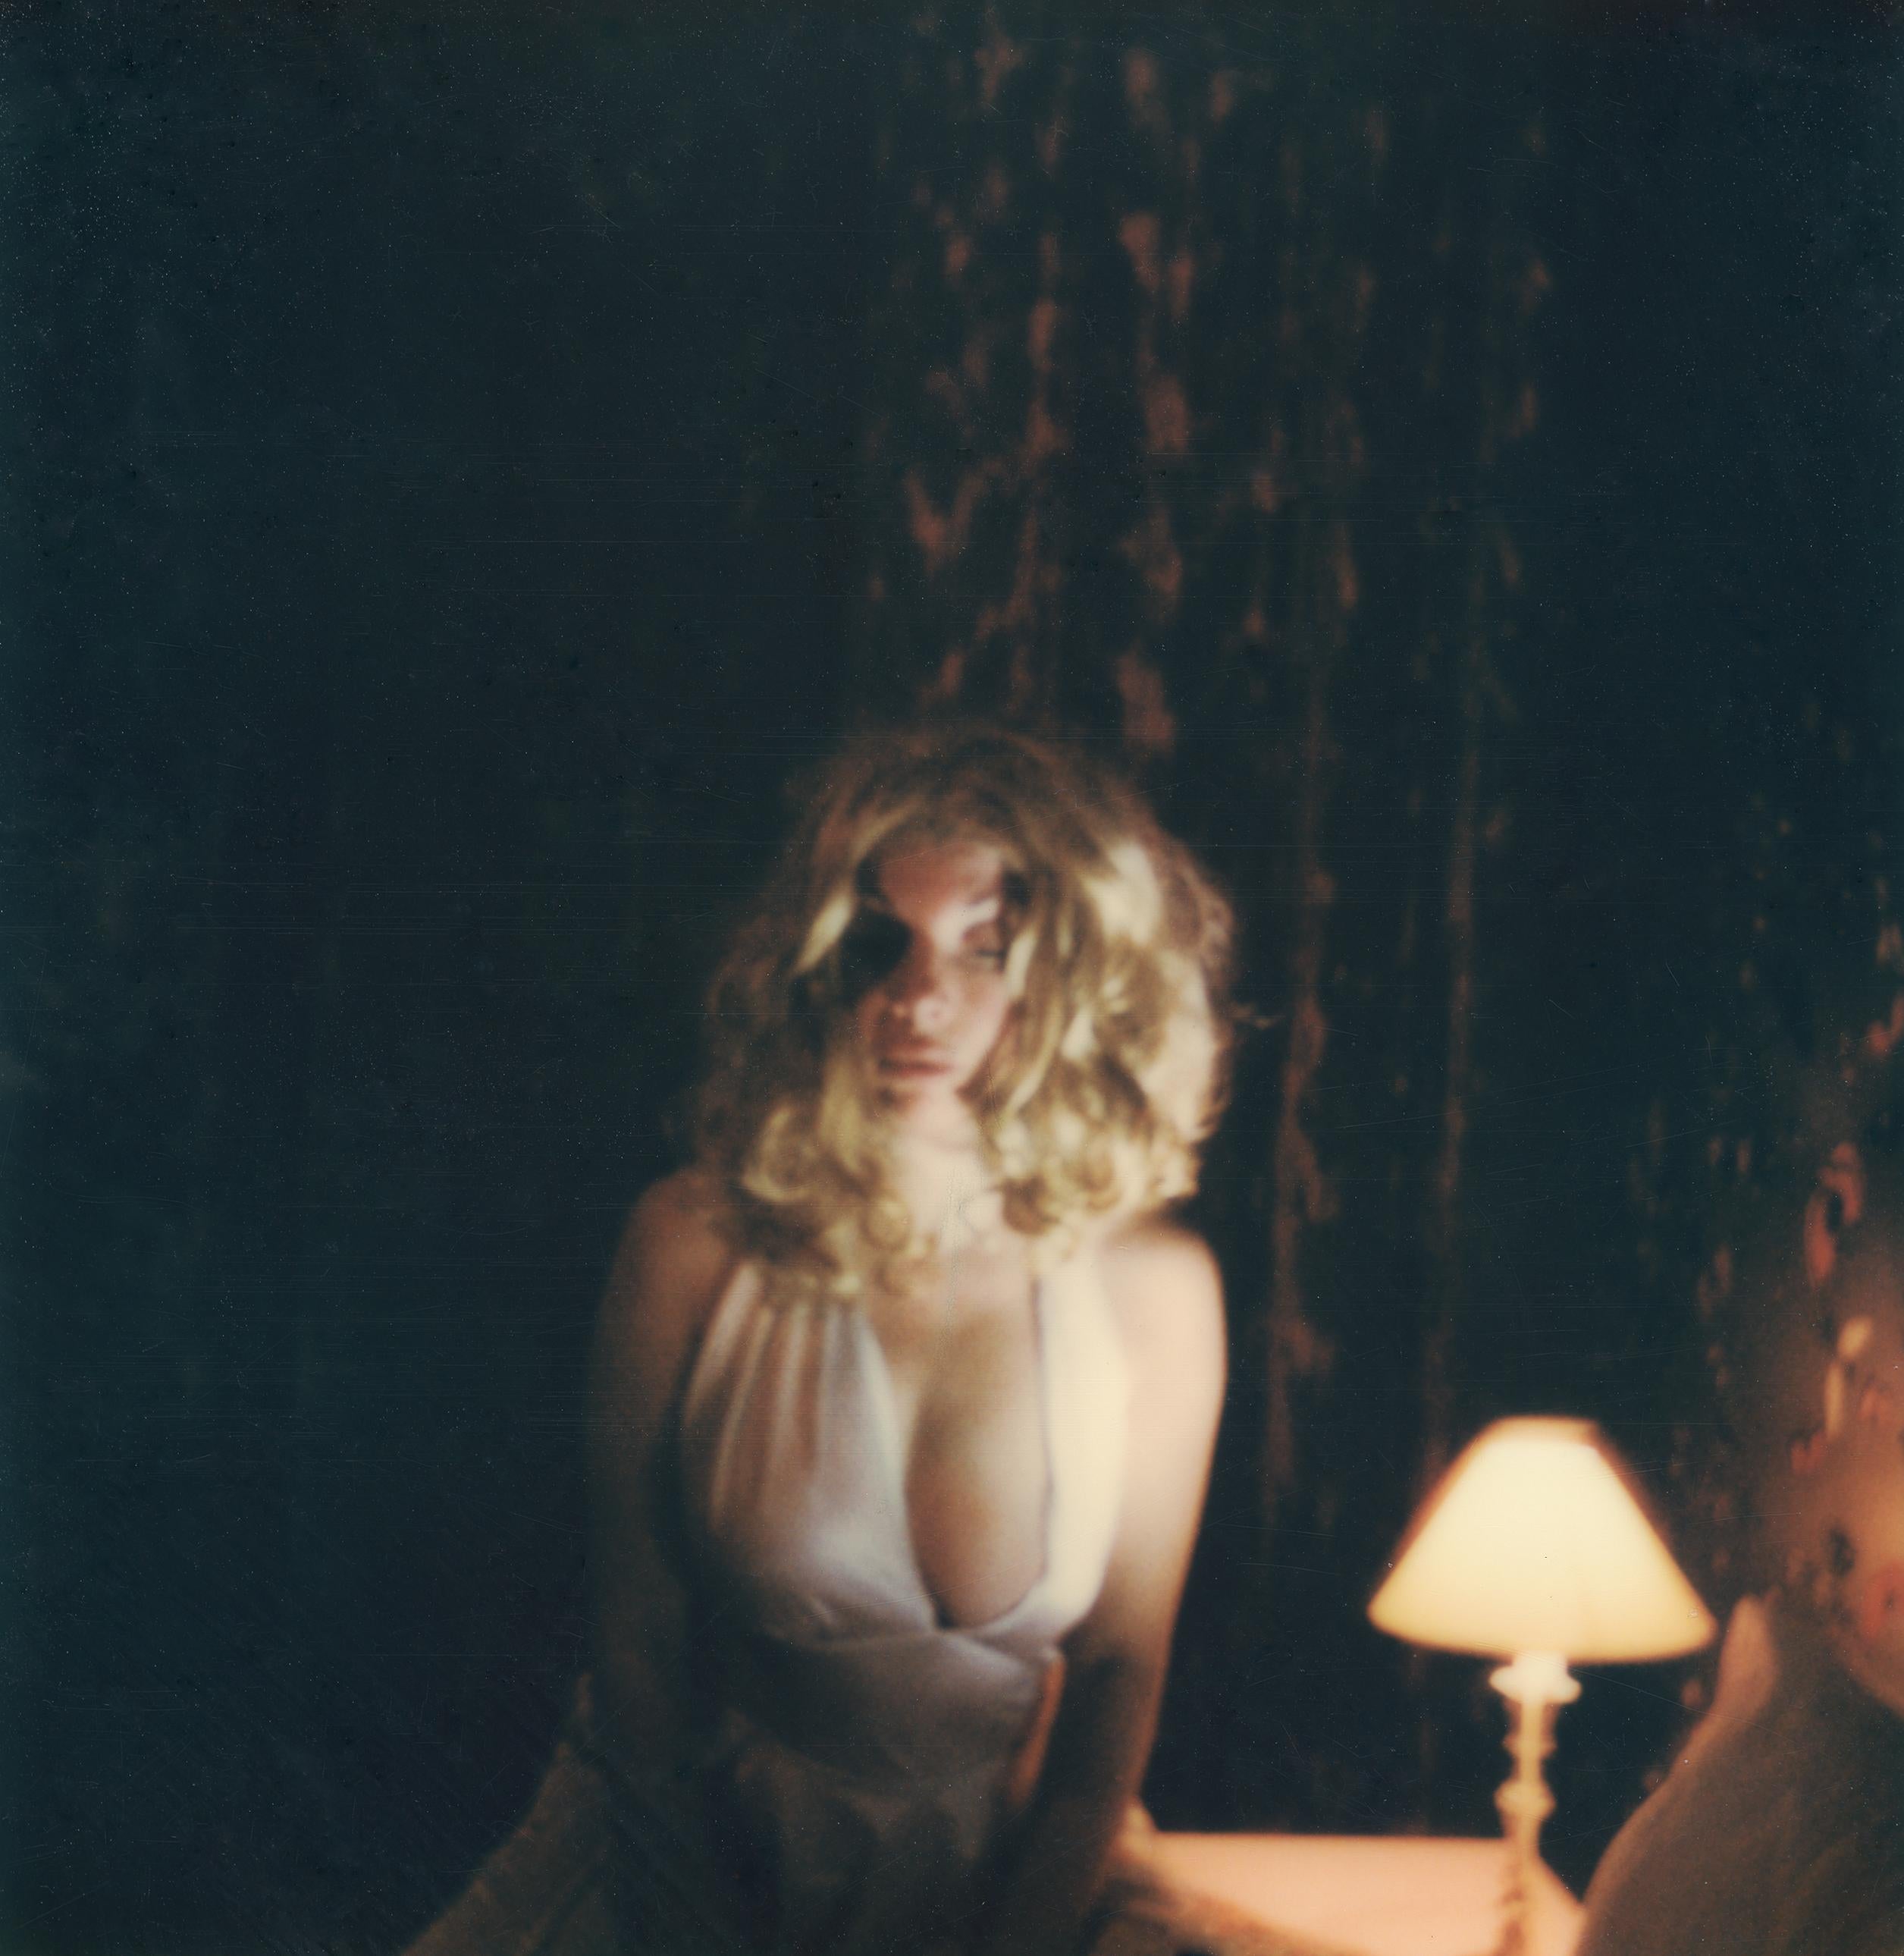 Clare Marie Bailey Color Photograph - The Dead of Night - Contemporary, Polaroid, Woman, 21st Century